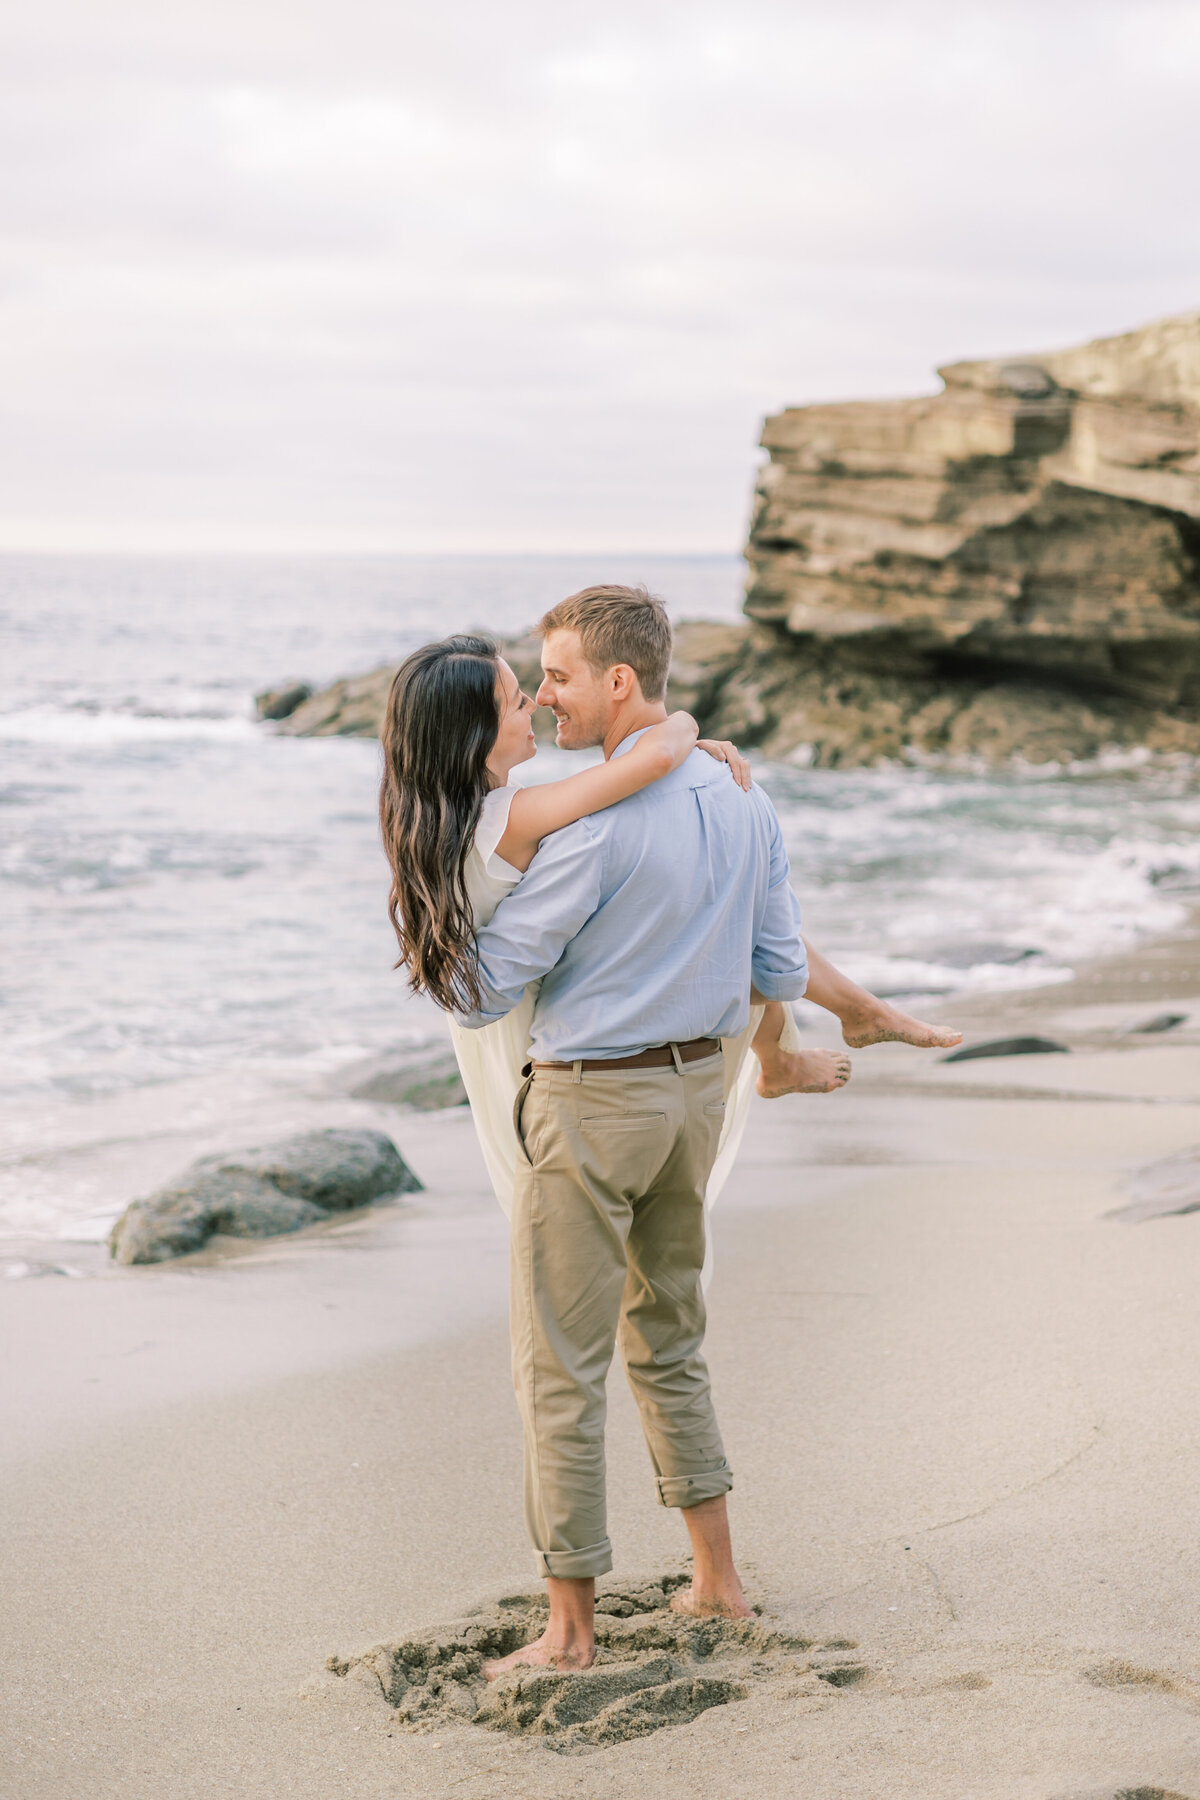 Jocelyn and Spencer Photography California Santa Barbara Wedding Engagement Luxury High End Romantic Imagery Light Airy Fineart Film Style14